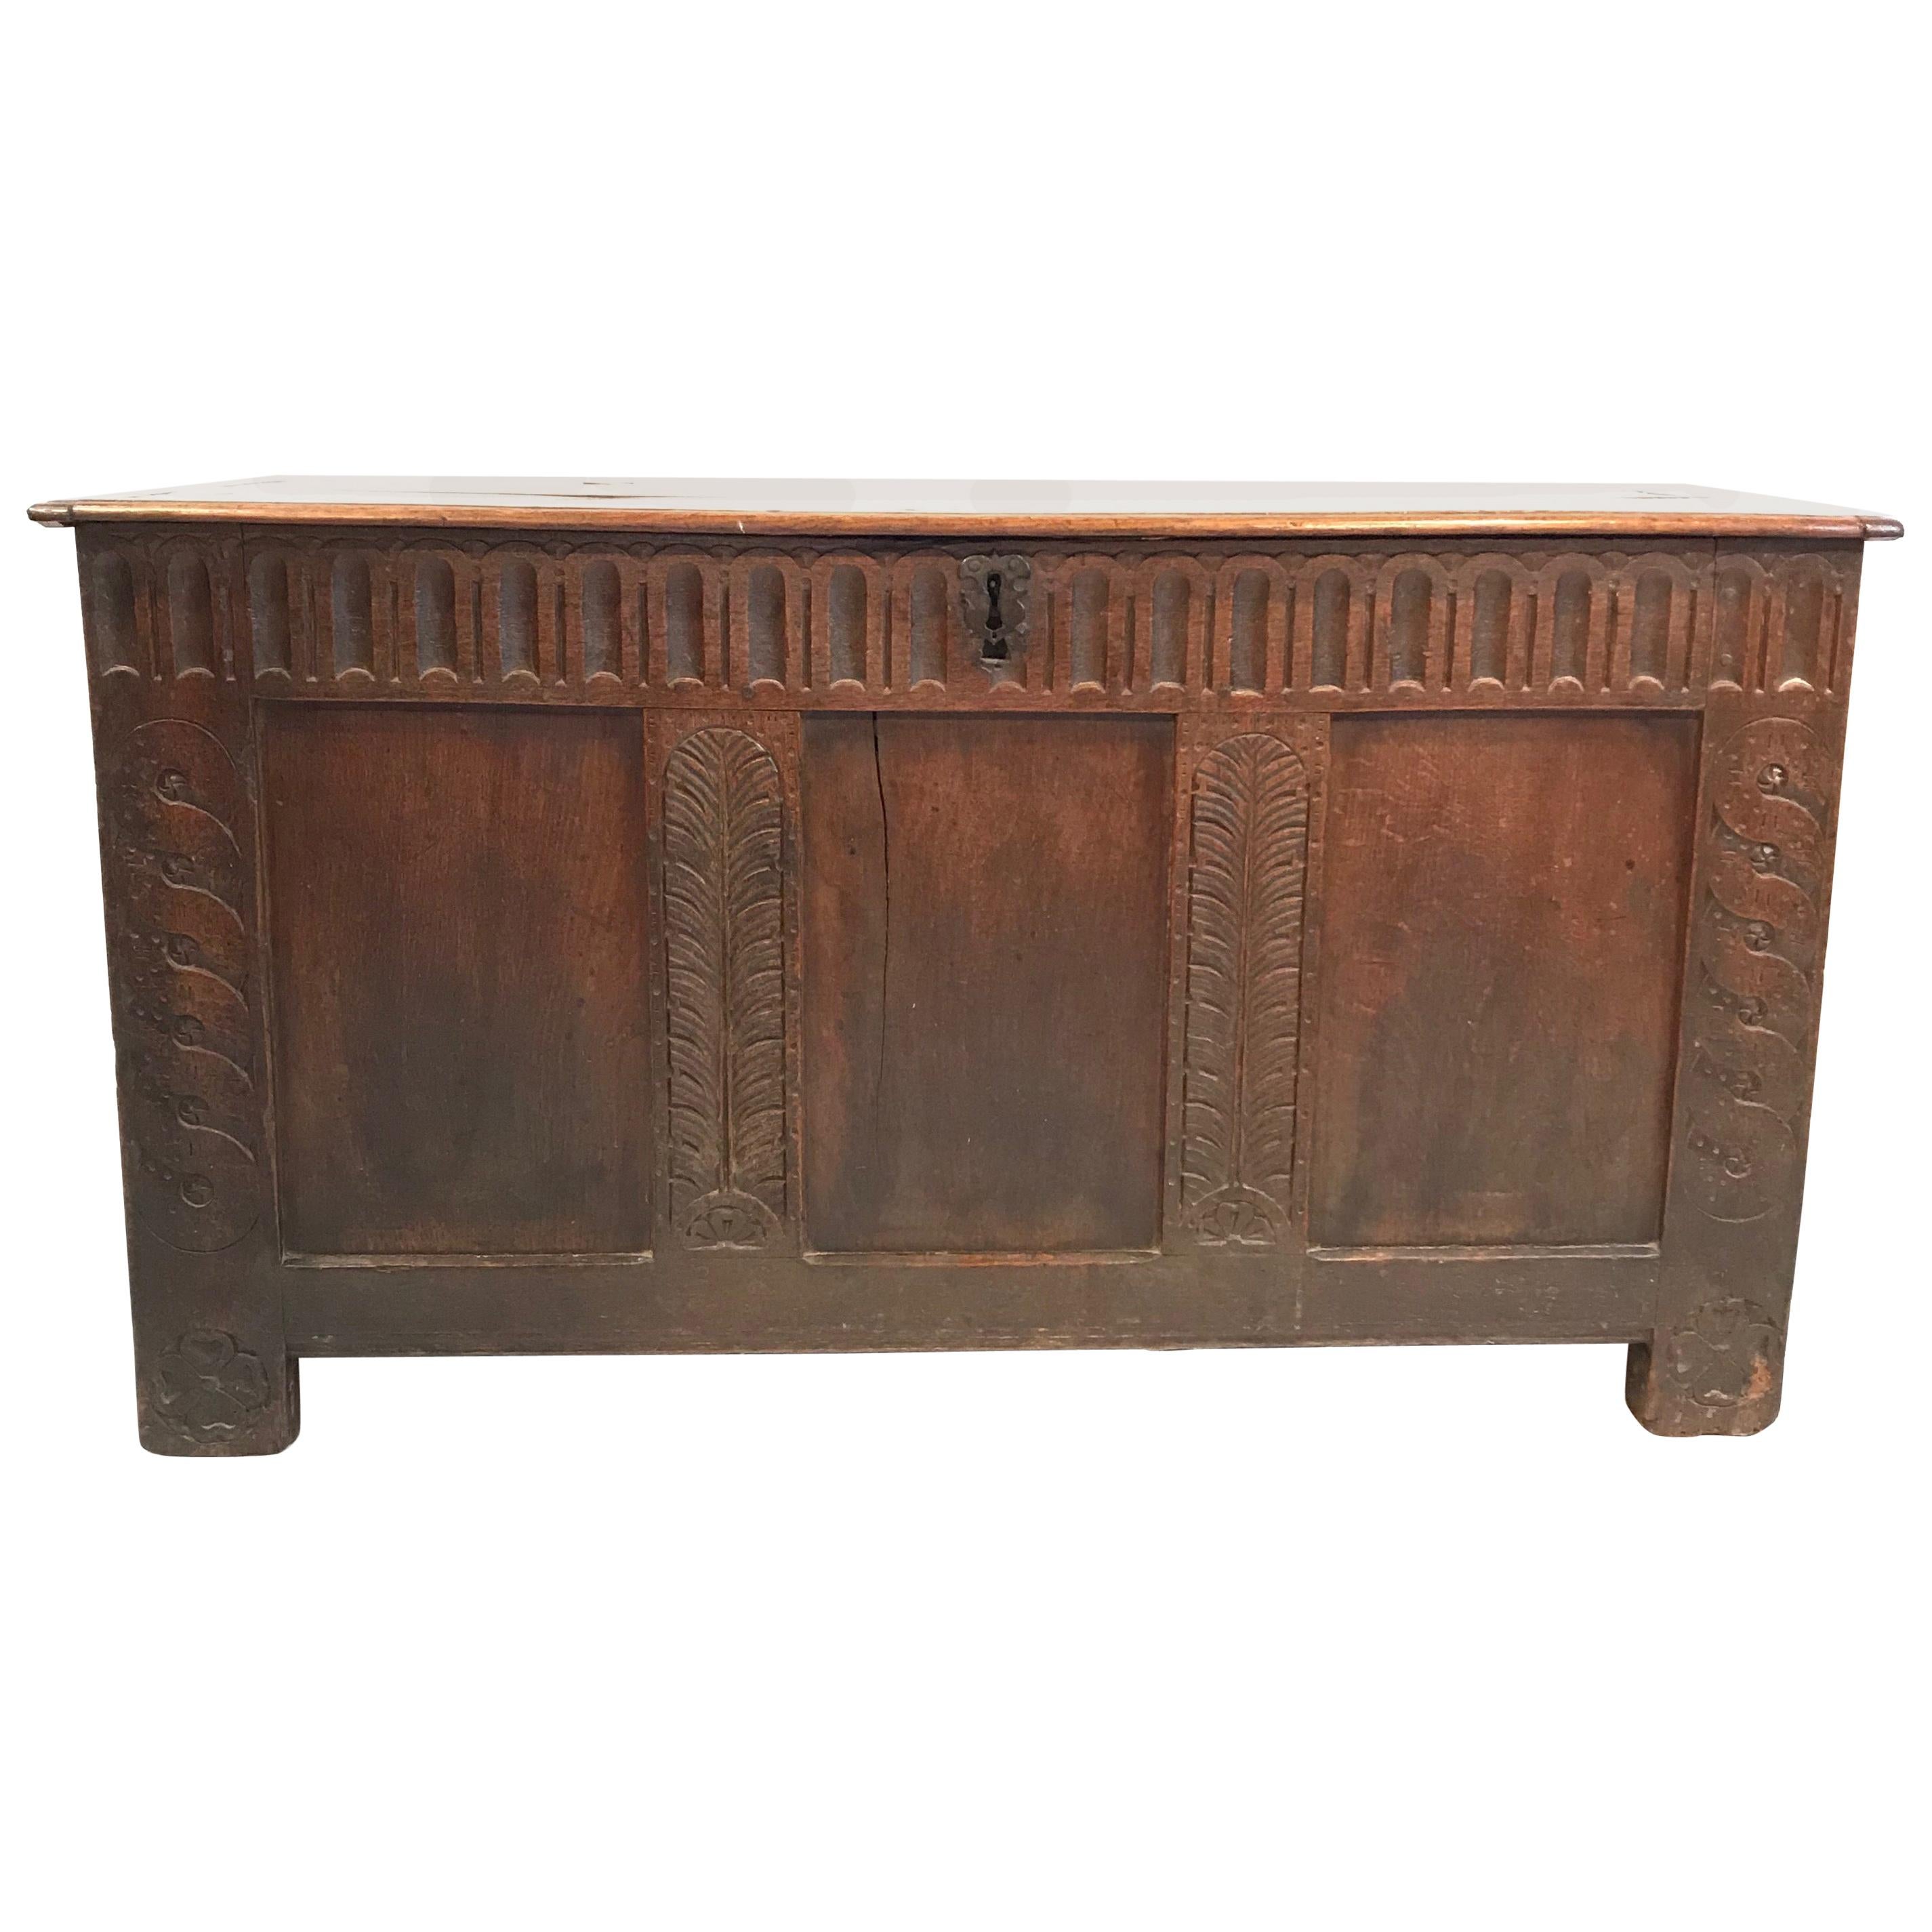 Handsome Early 18th Century British Coffer Blanket Chest